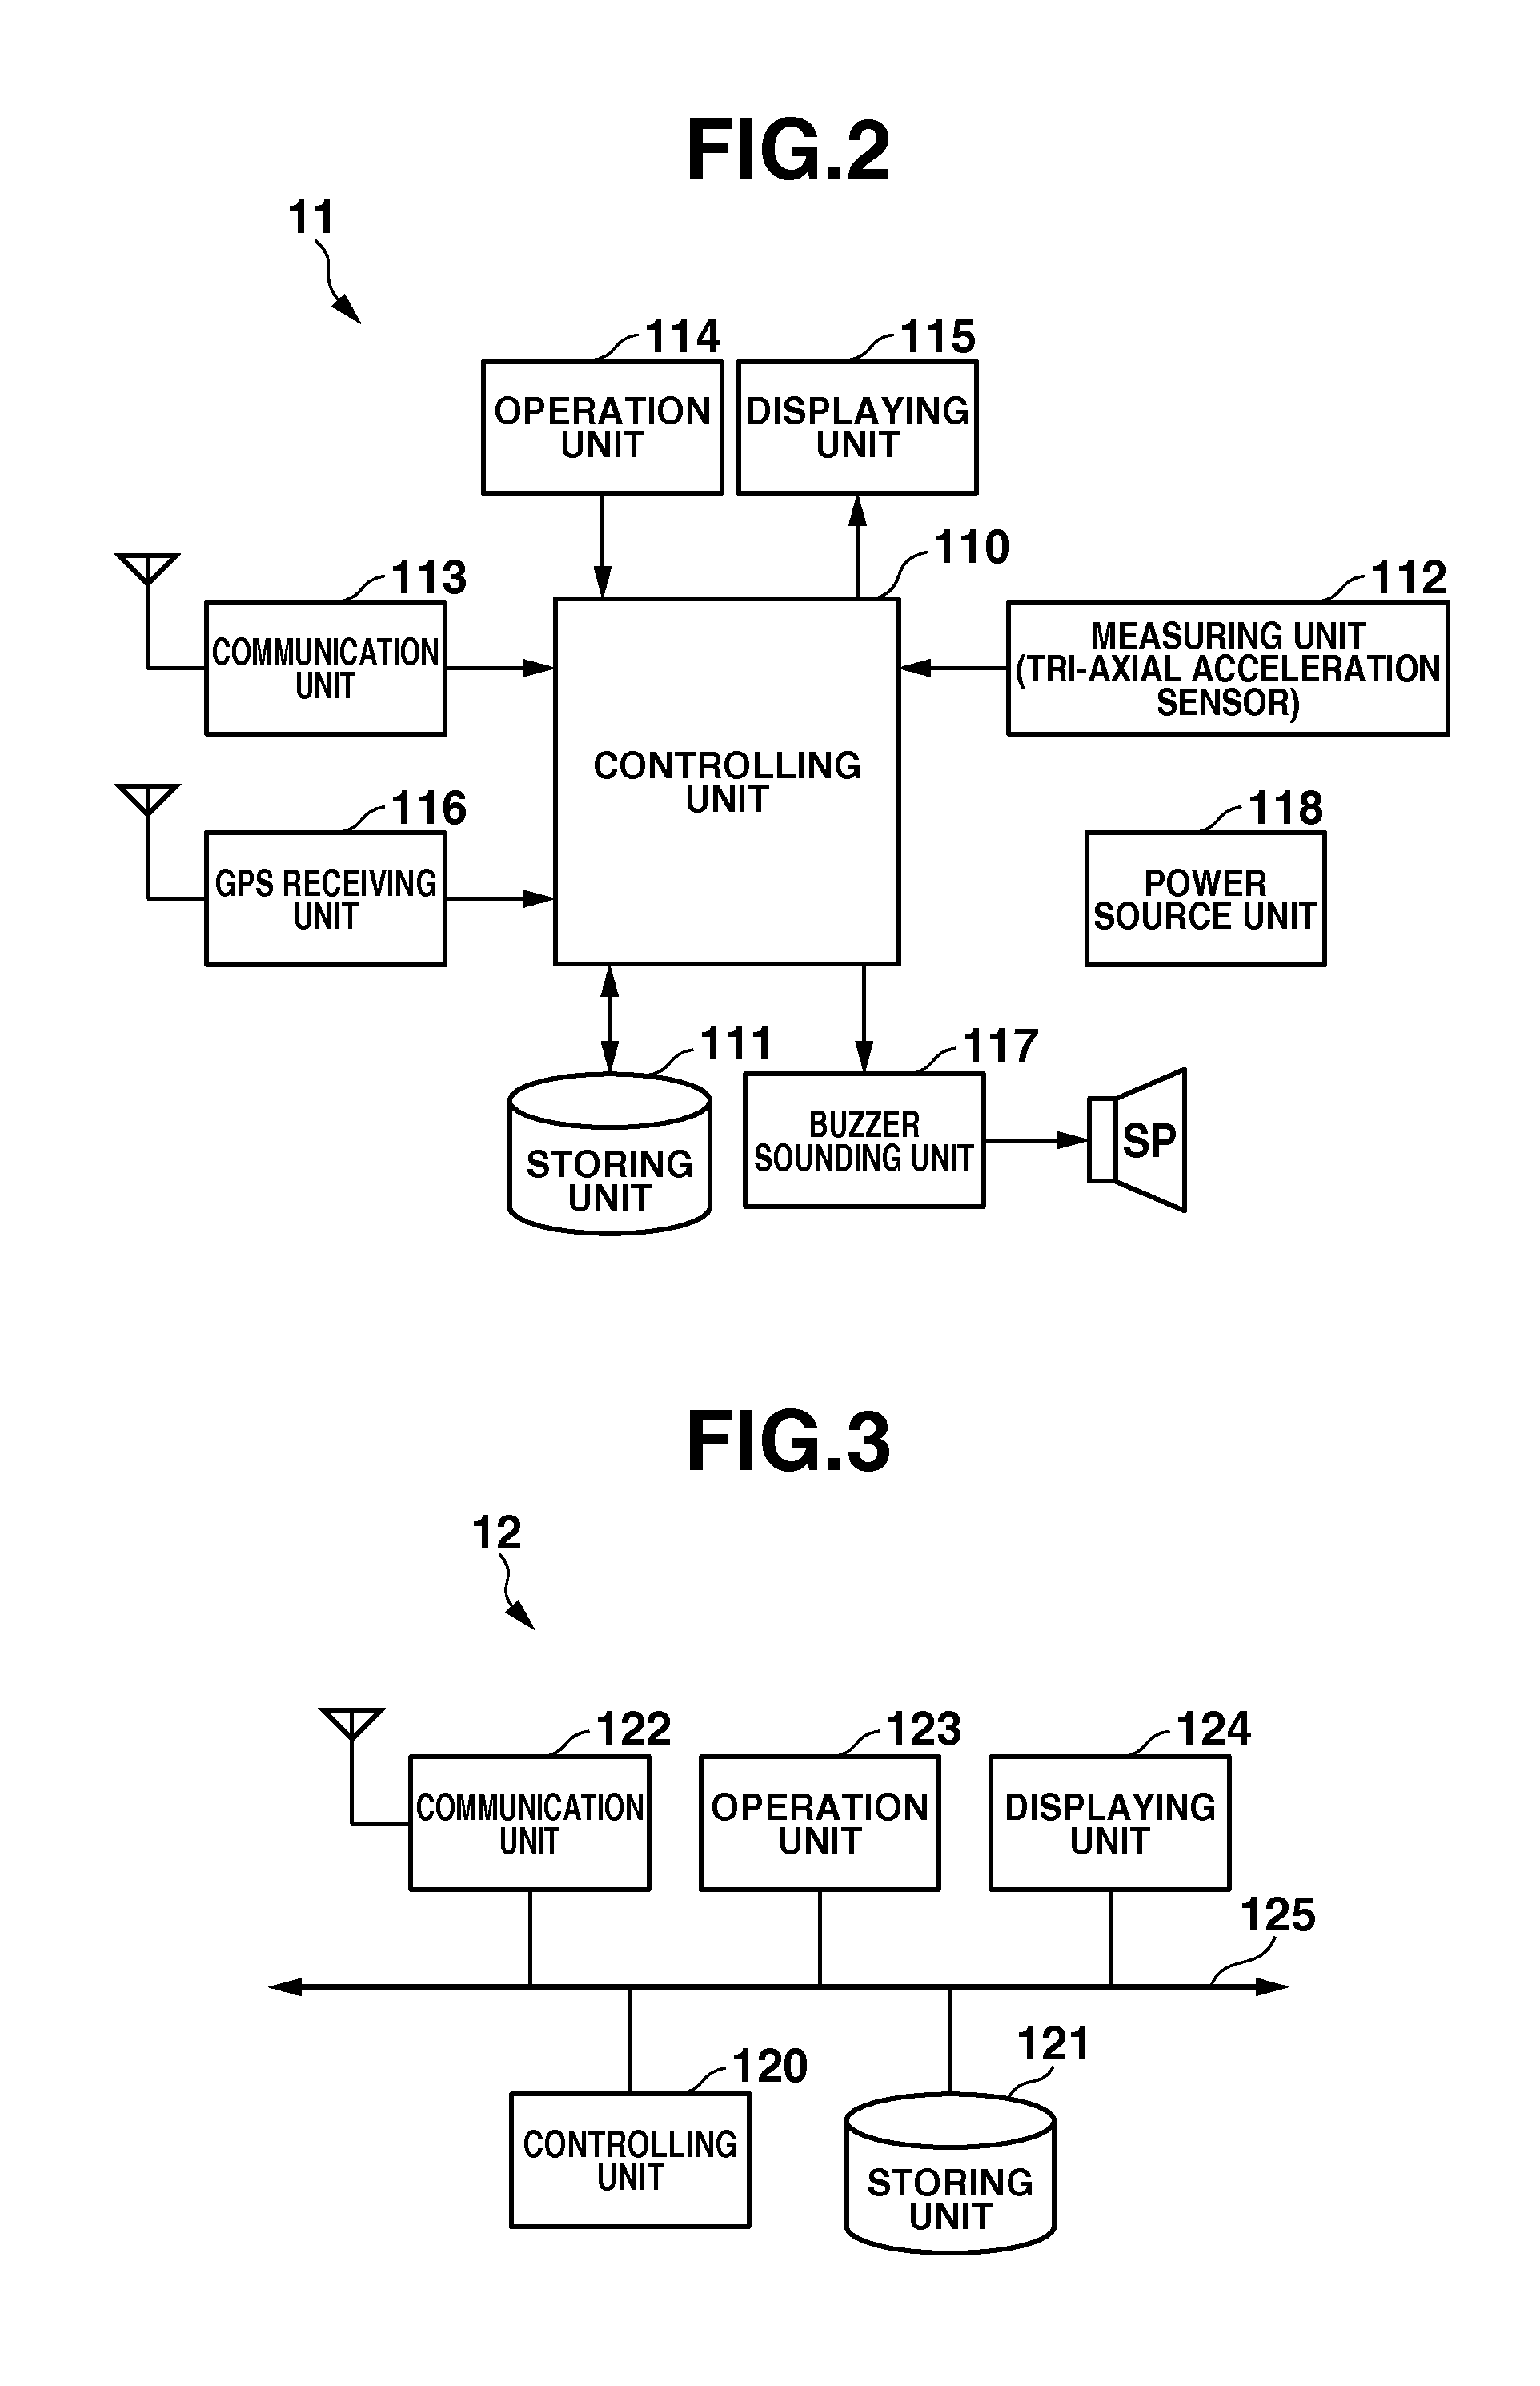 Training supporting apparatus and system for supporting training of walking and/or running